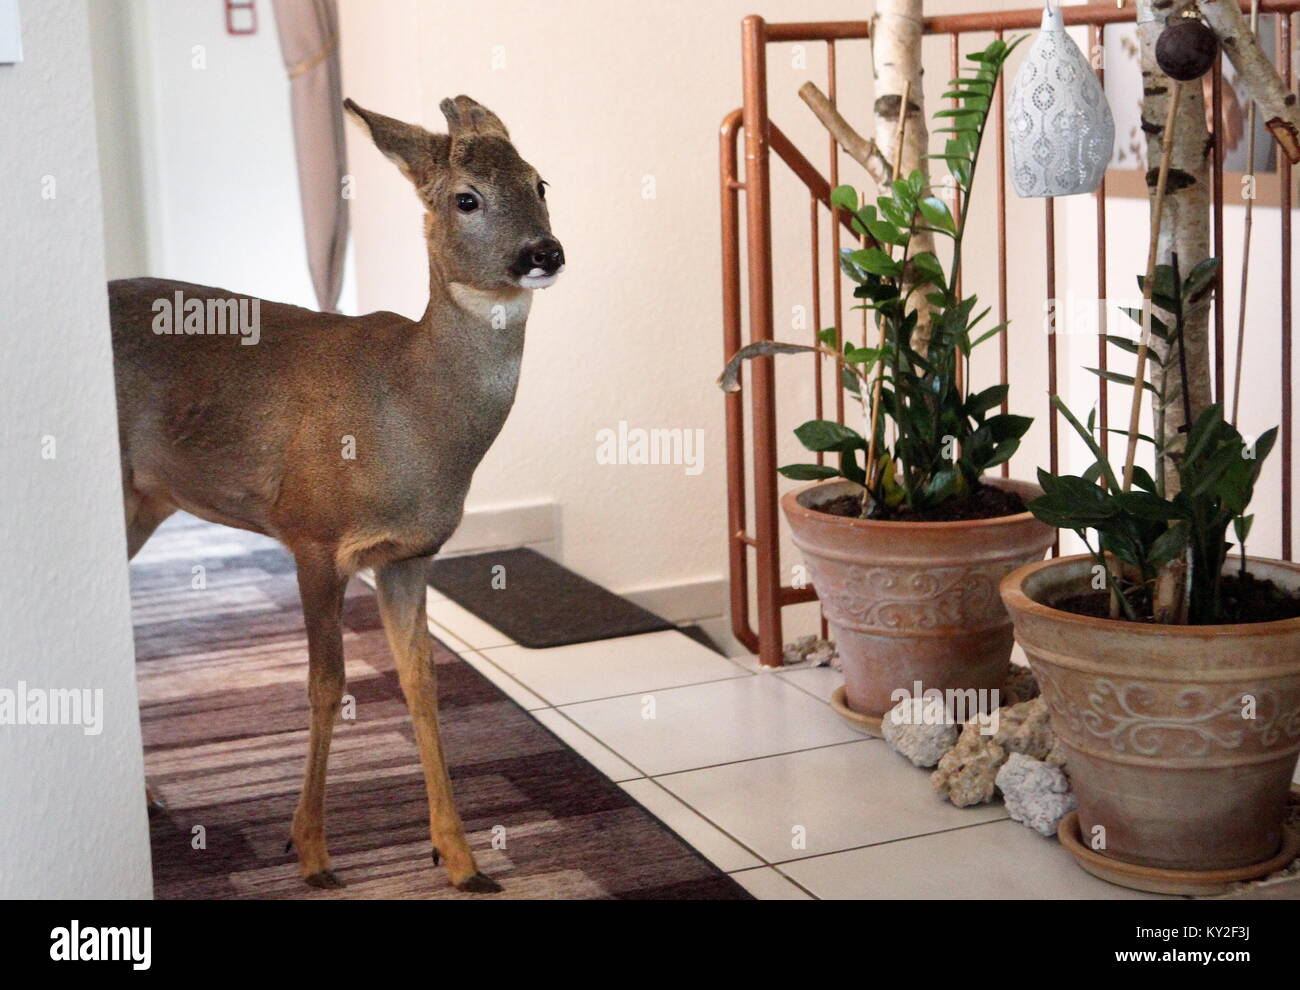 Gross-Zimmern, Germany. 12th Jan, 2018. Fawn 'Bambi' walks around the townhouse of Anja Pahlen and Peter Goebel in Gross-Zimmern, Germany, 12 January 2018. The house-trained animal lives with the couple and its two dogs after Pahlen and Goebel saved the baby deer from starvation. Credit: Karl-Heinz Bärtl/dpa/Alamy Live News Stock Photo